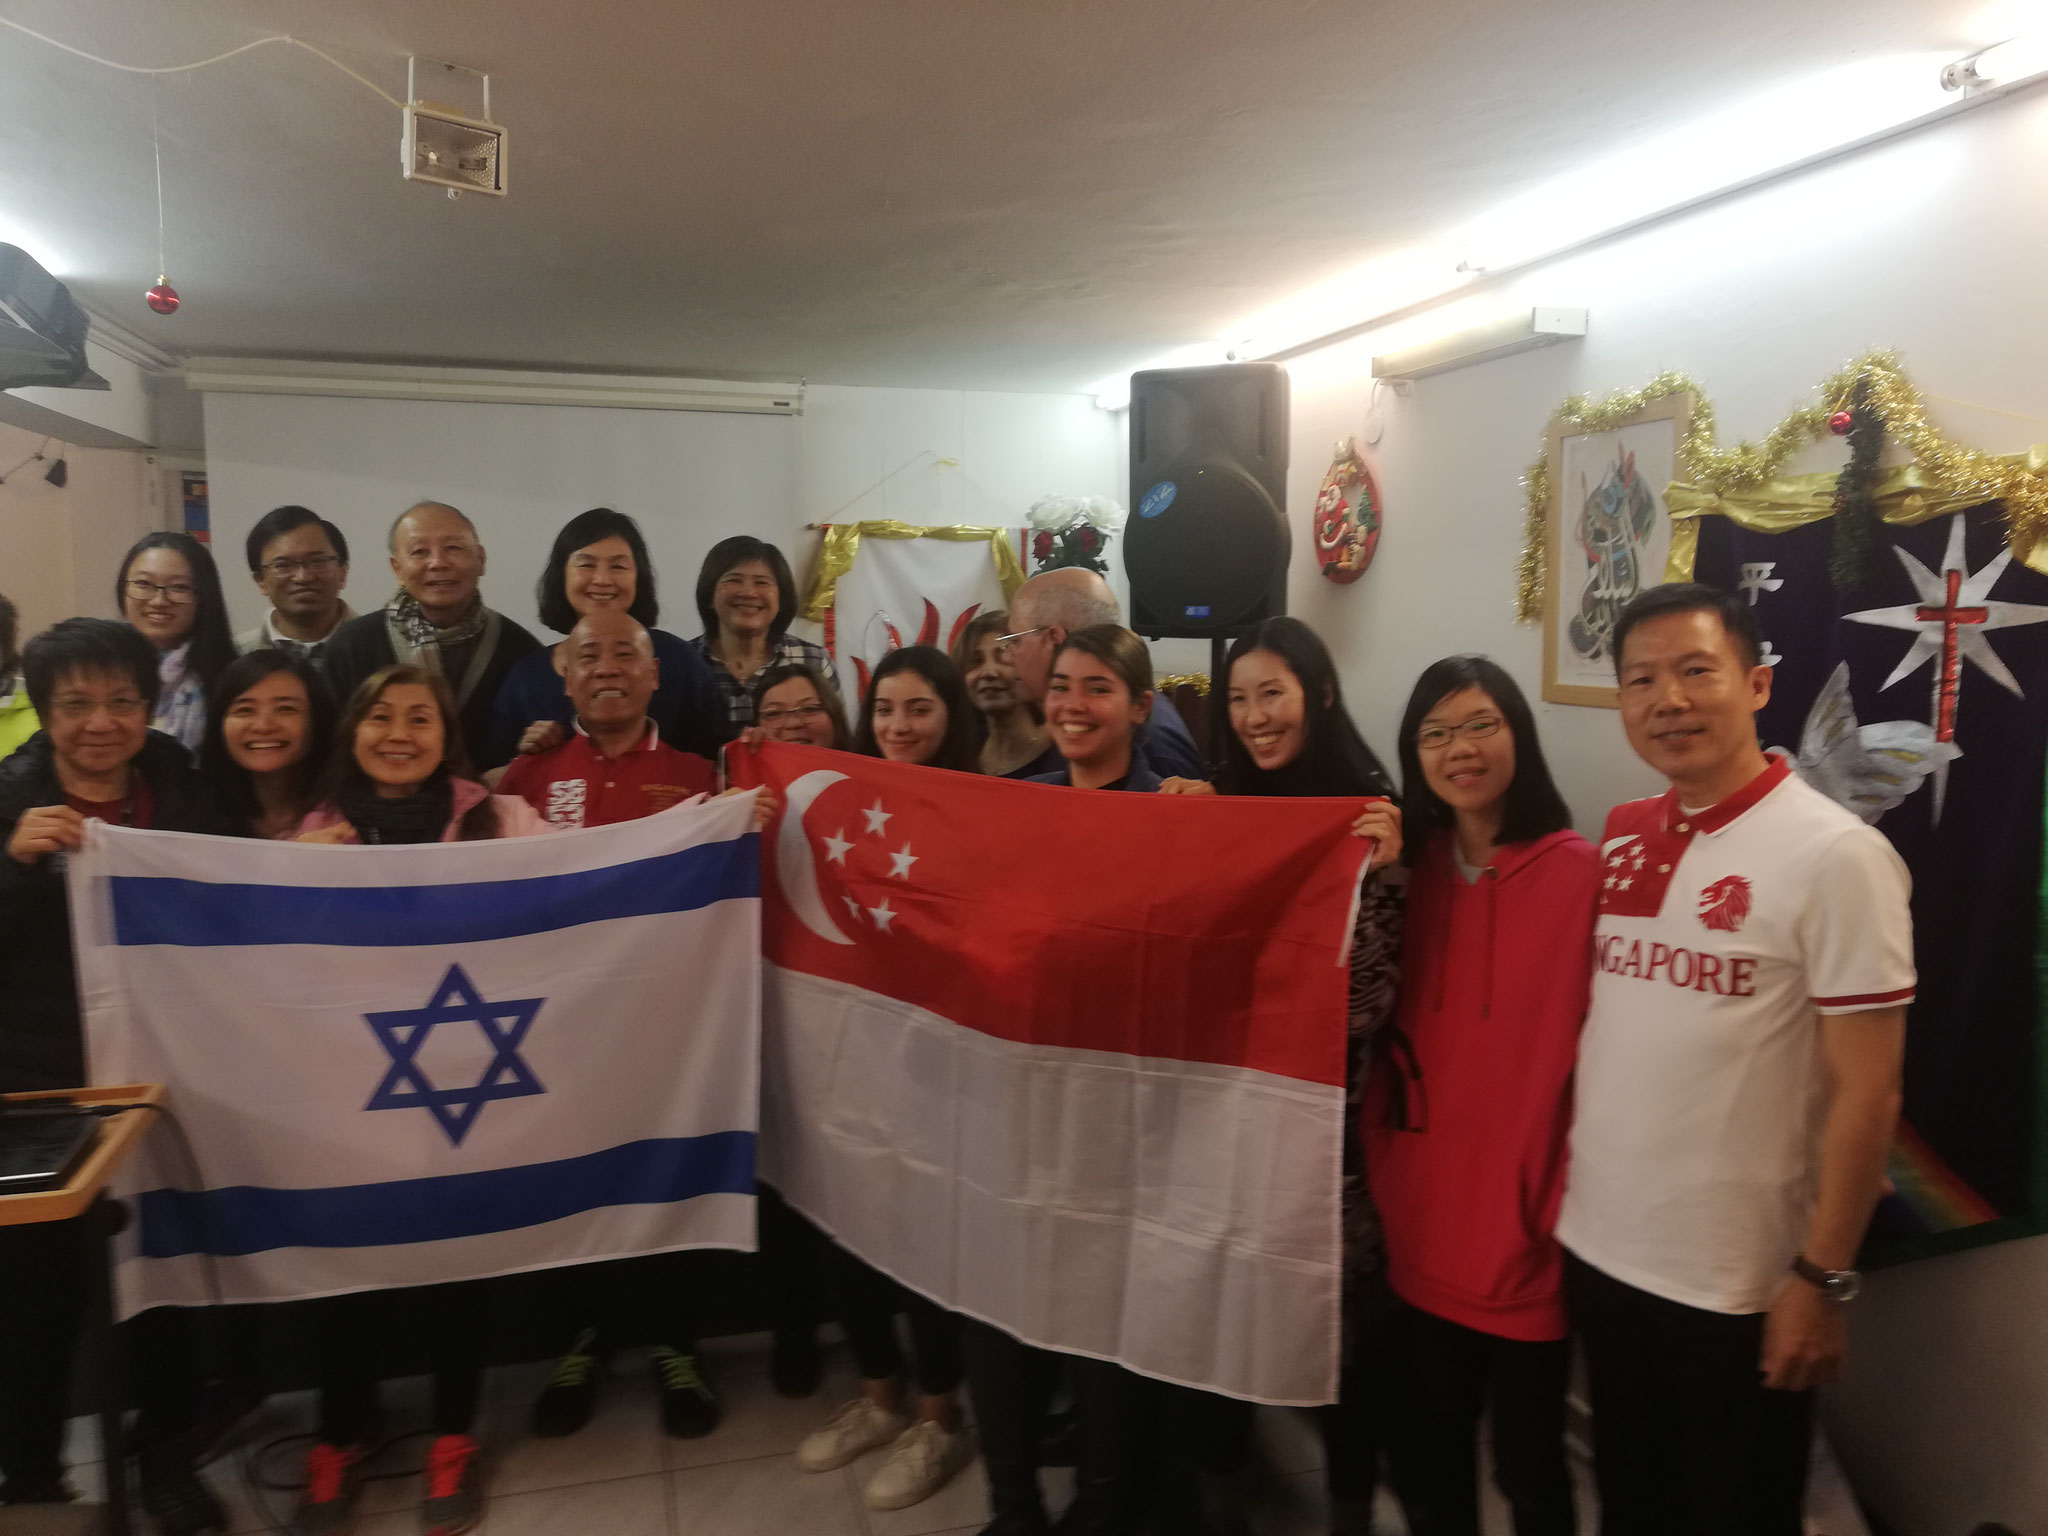 Friends forever! A group from Singapore in Israel, 2018